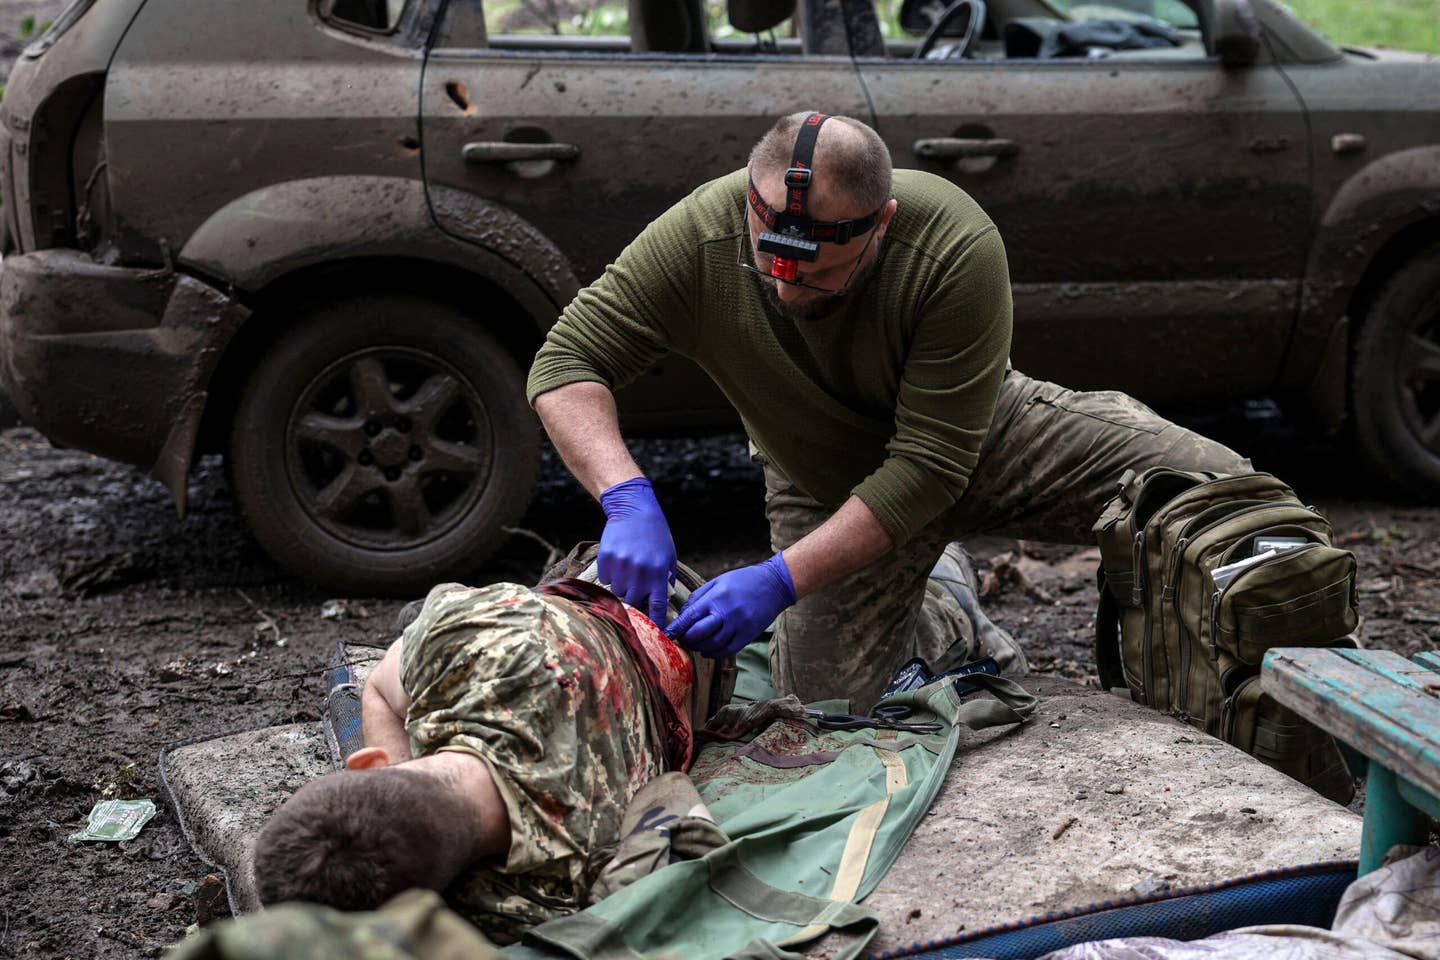 A military paramedic treats a Ukrainian injured serviceman on a street in the frontline city of Bakhmut. (Photo by ANATOLII STEPANOV/AFP via Getty Images)